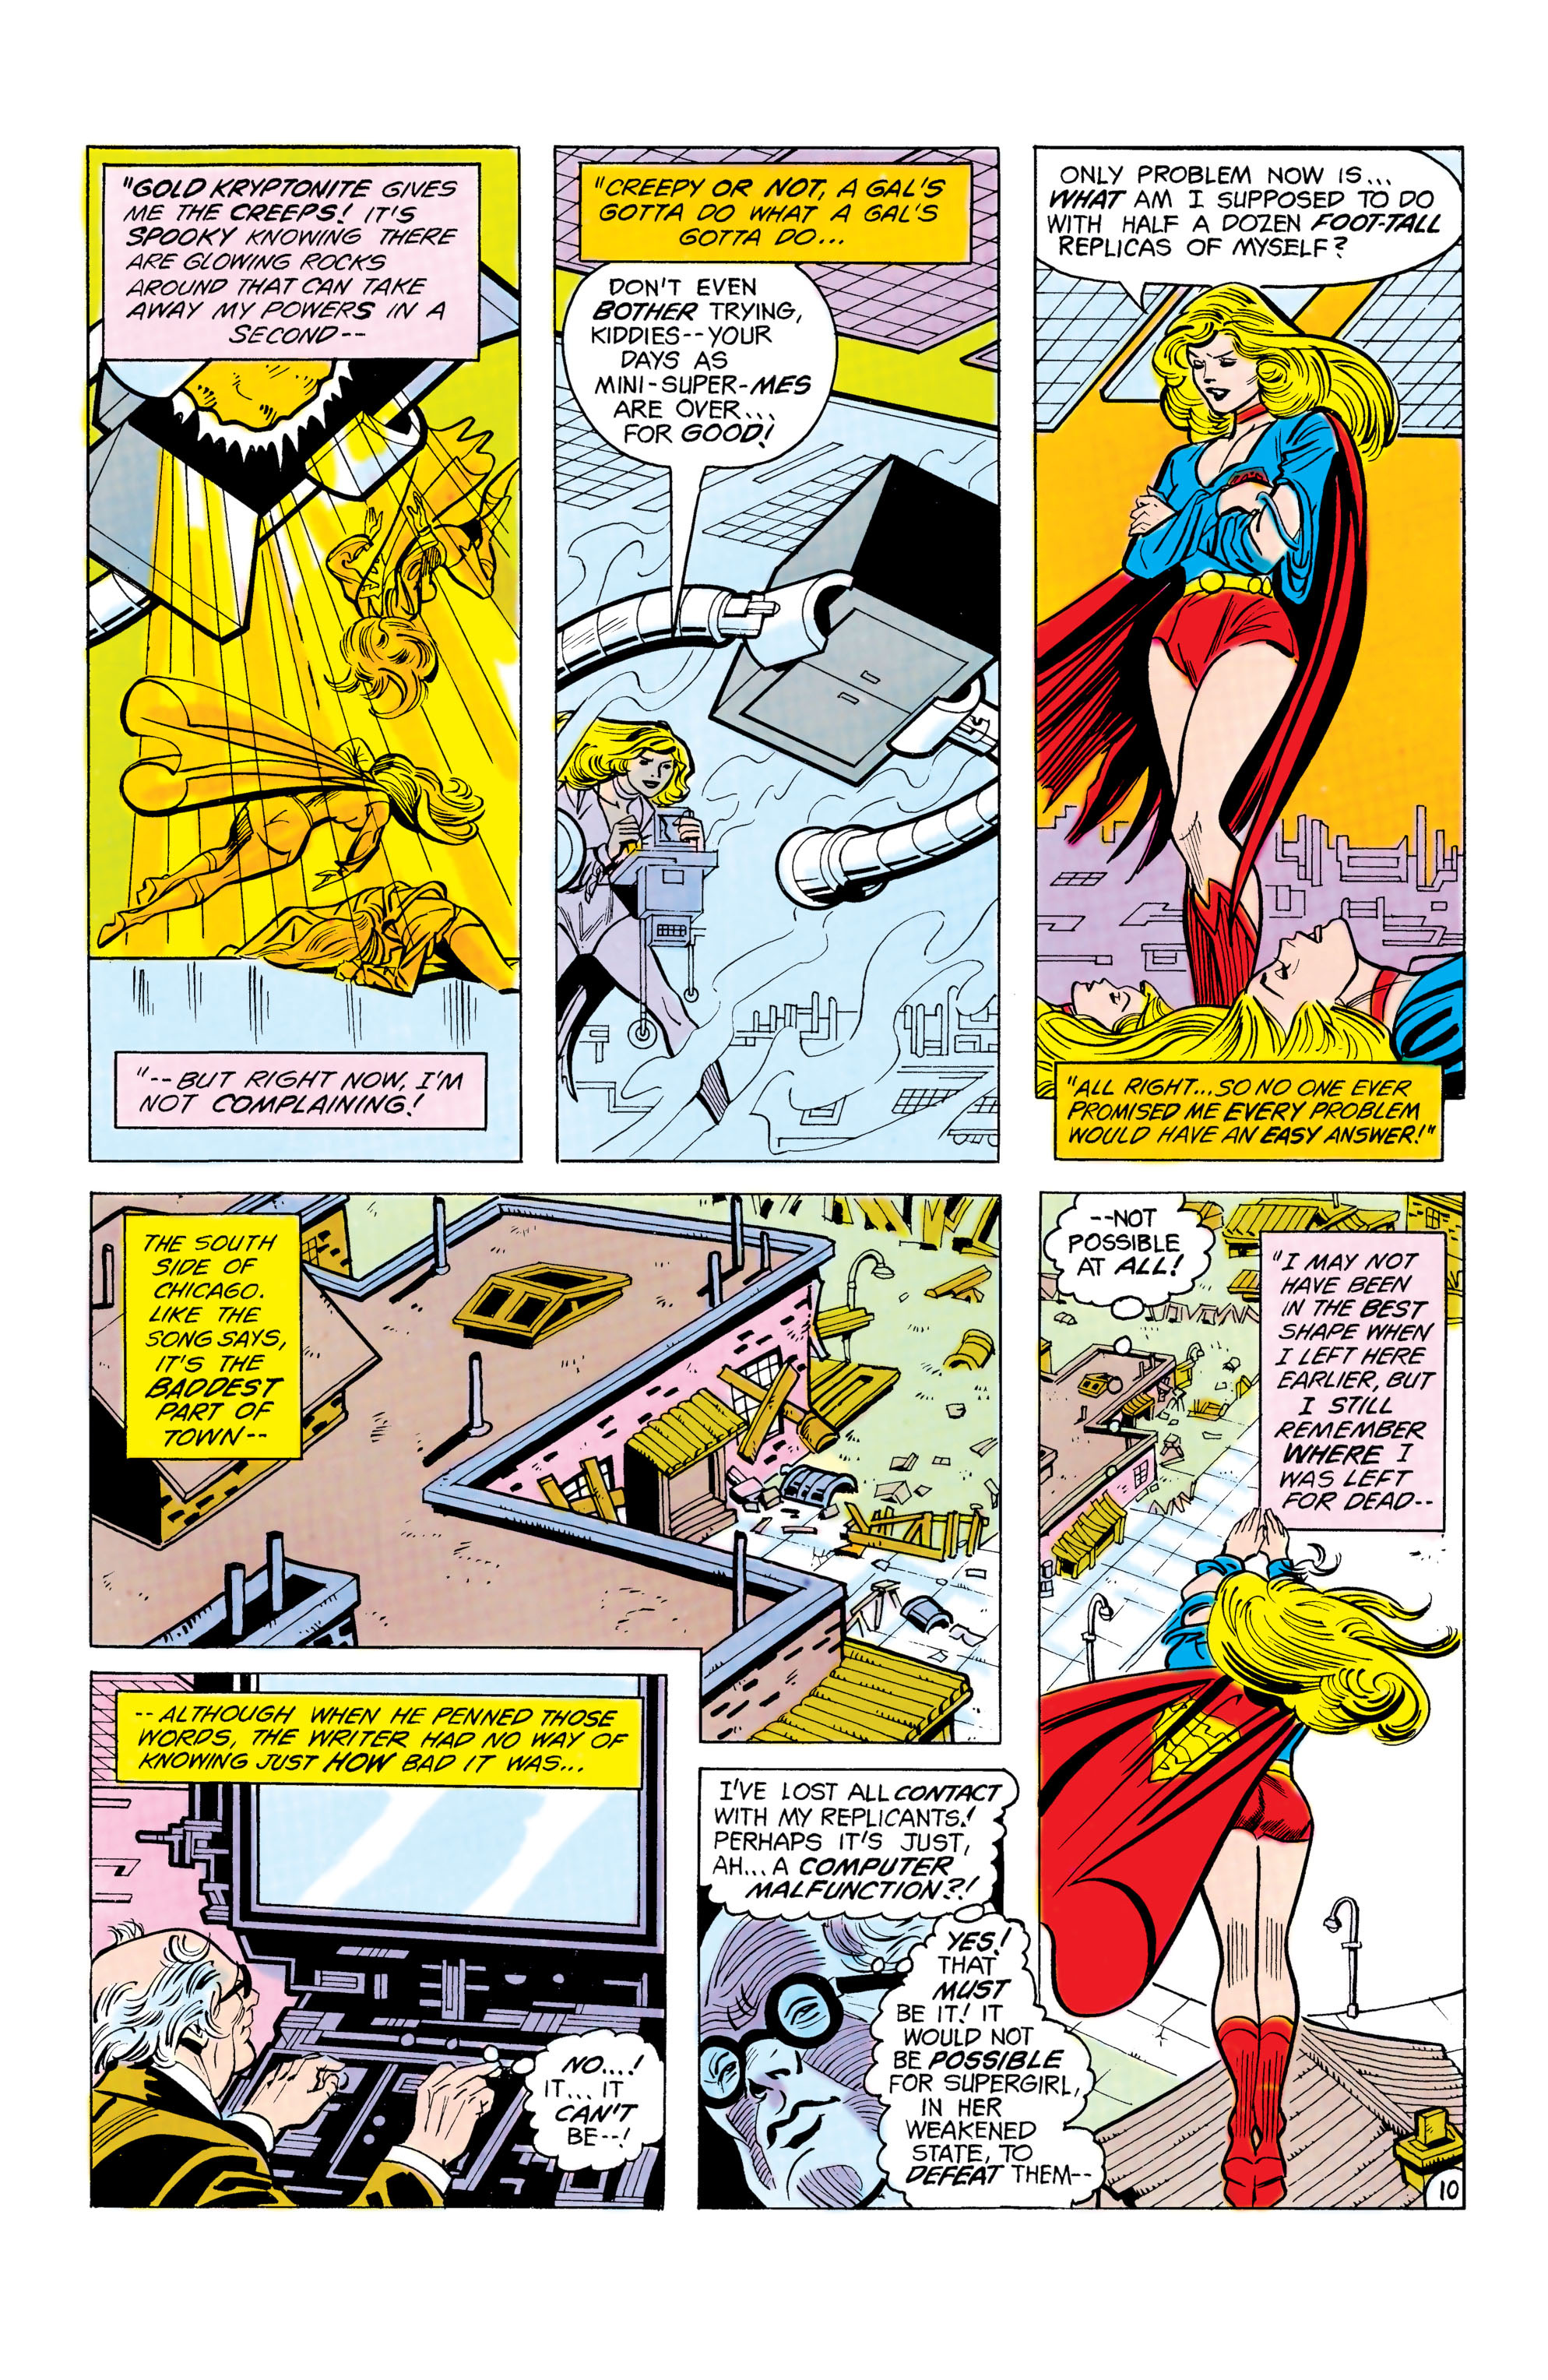 Supergirl (1982) 12 Page 10